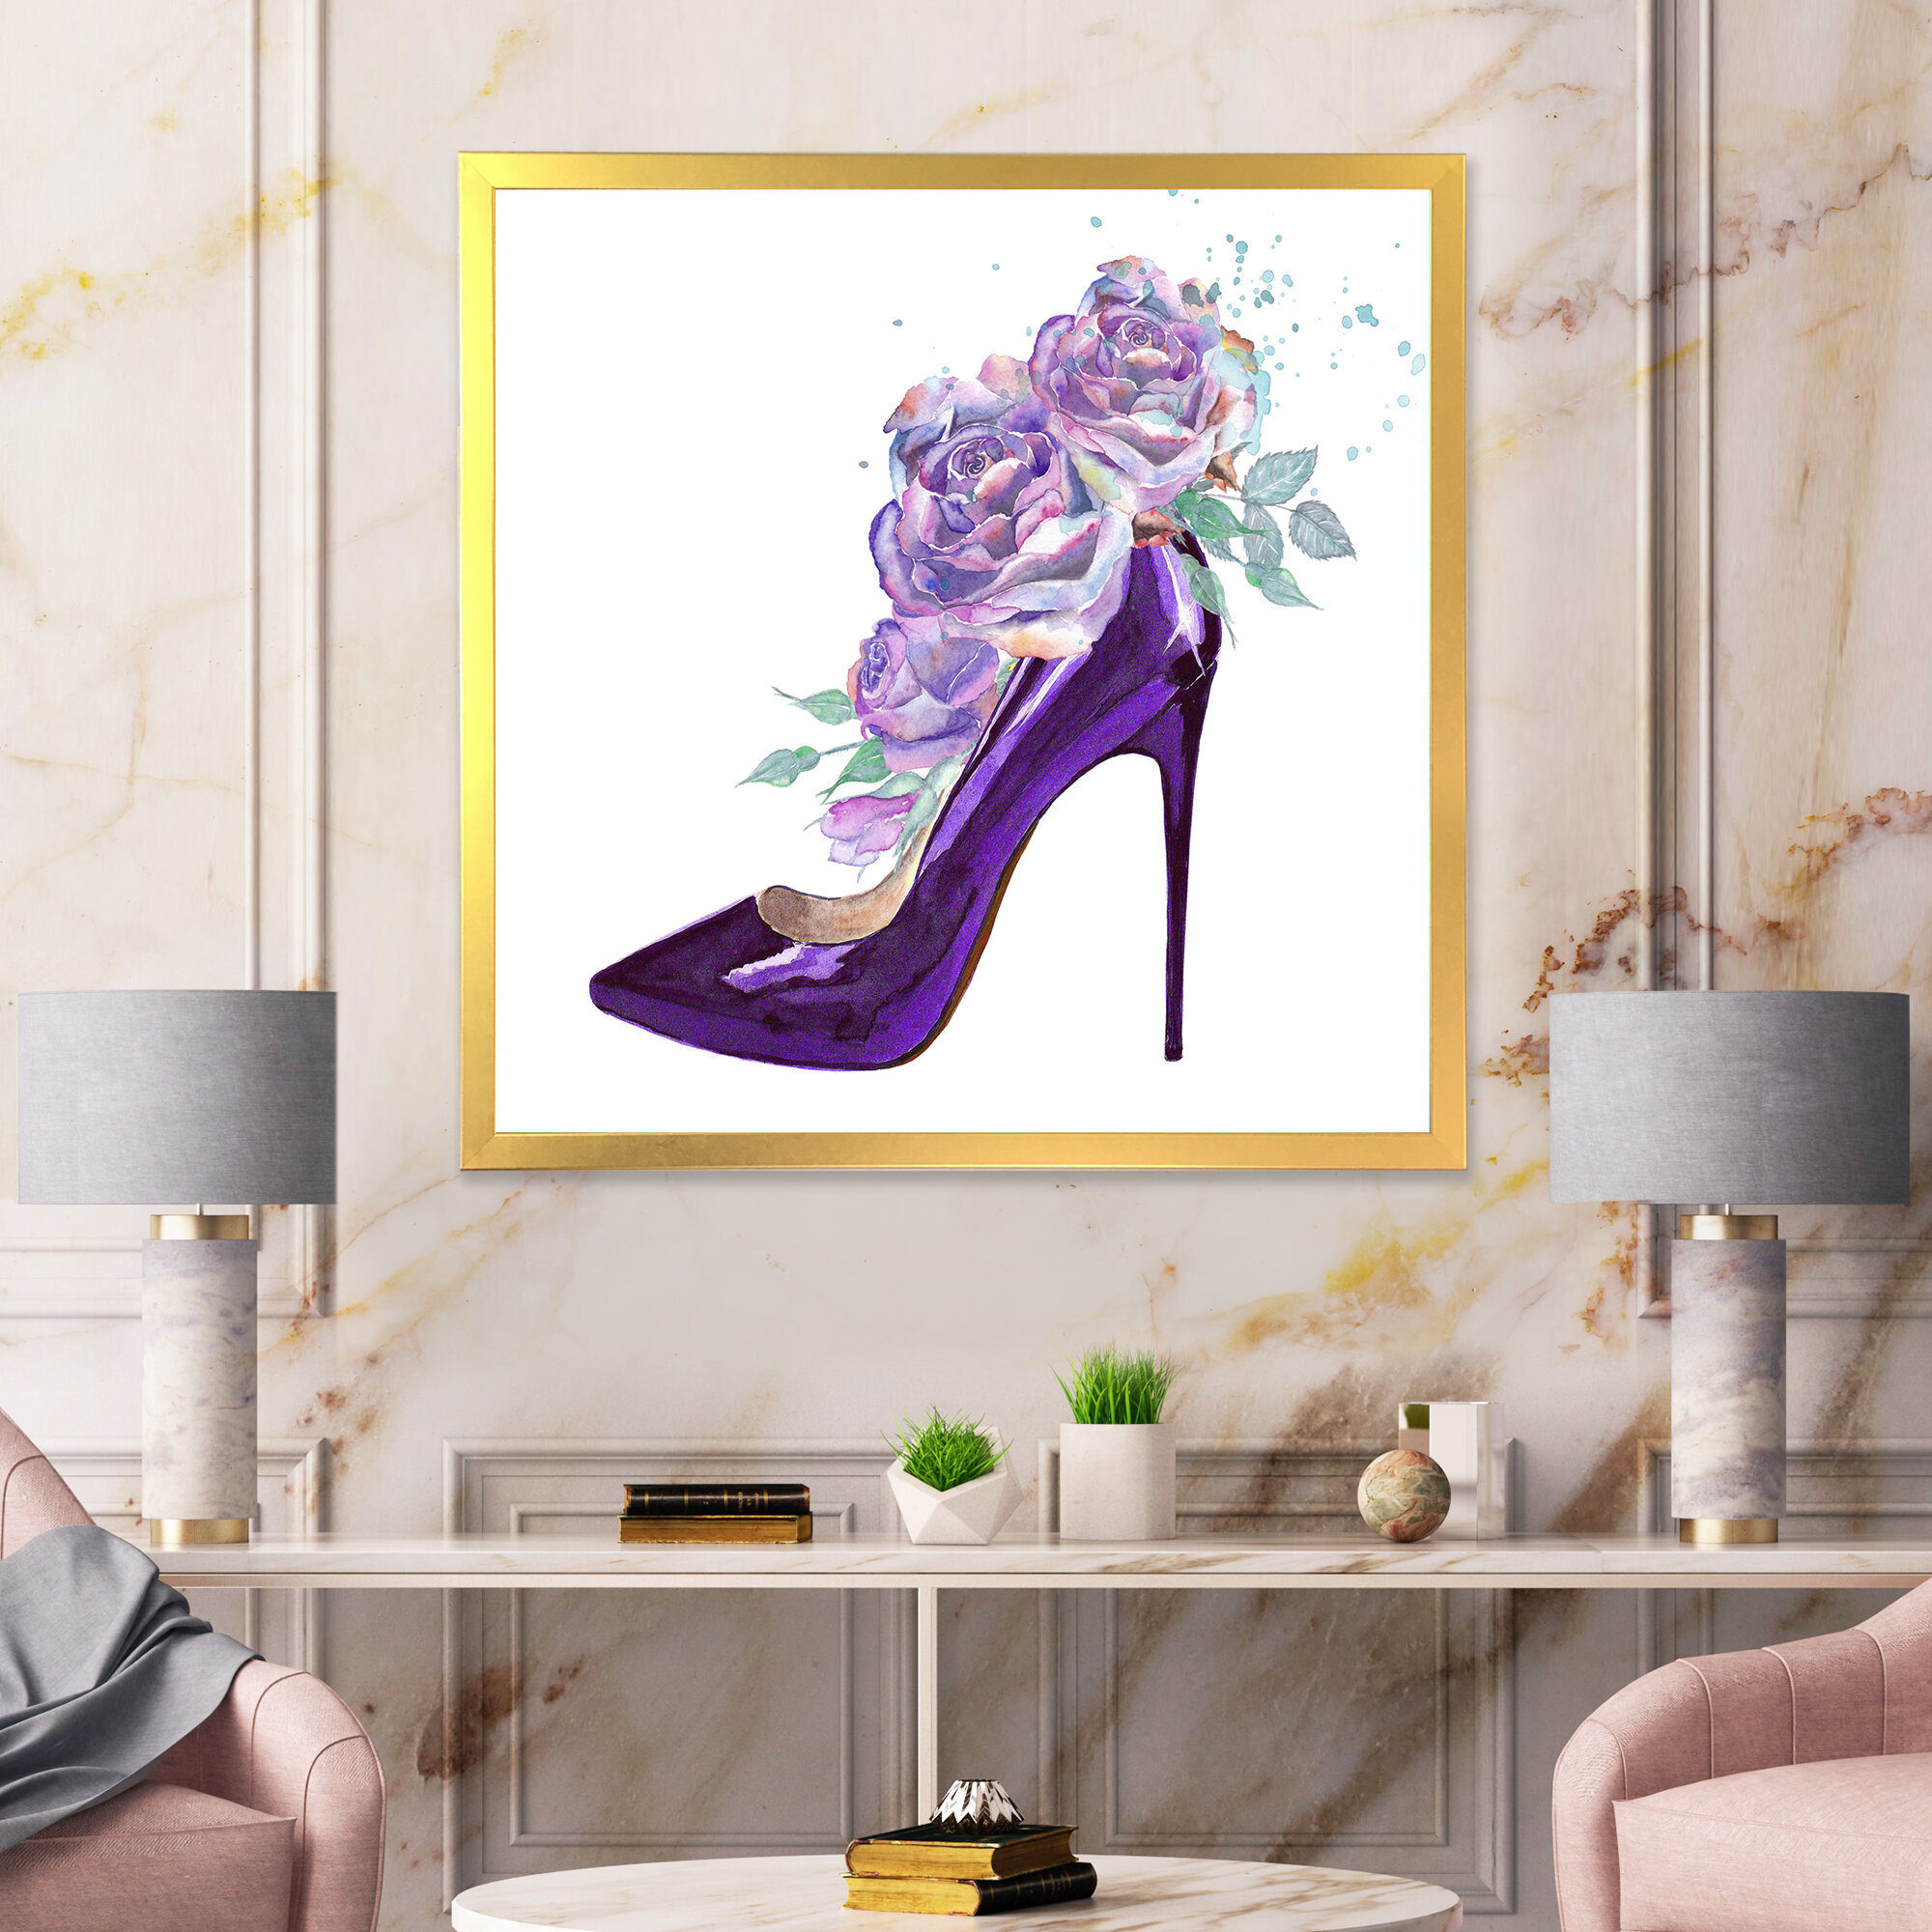 Dark Purple Stiletto Shoe with Pink Violet Roses - Picture Frame Painting on Canvas East Urban Home Format: Silver Framed Canvas, Size: 36 H x 36 W